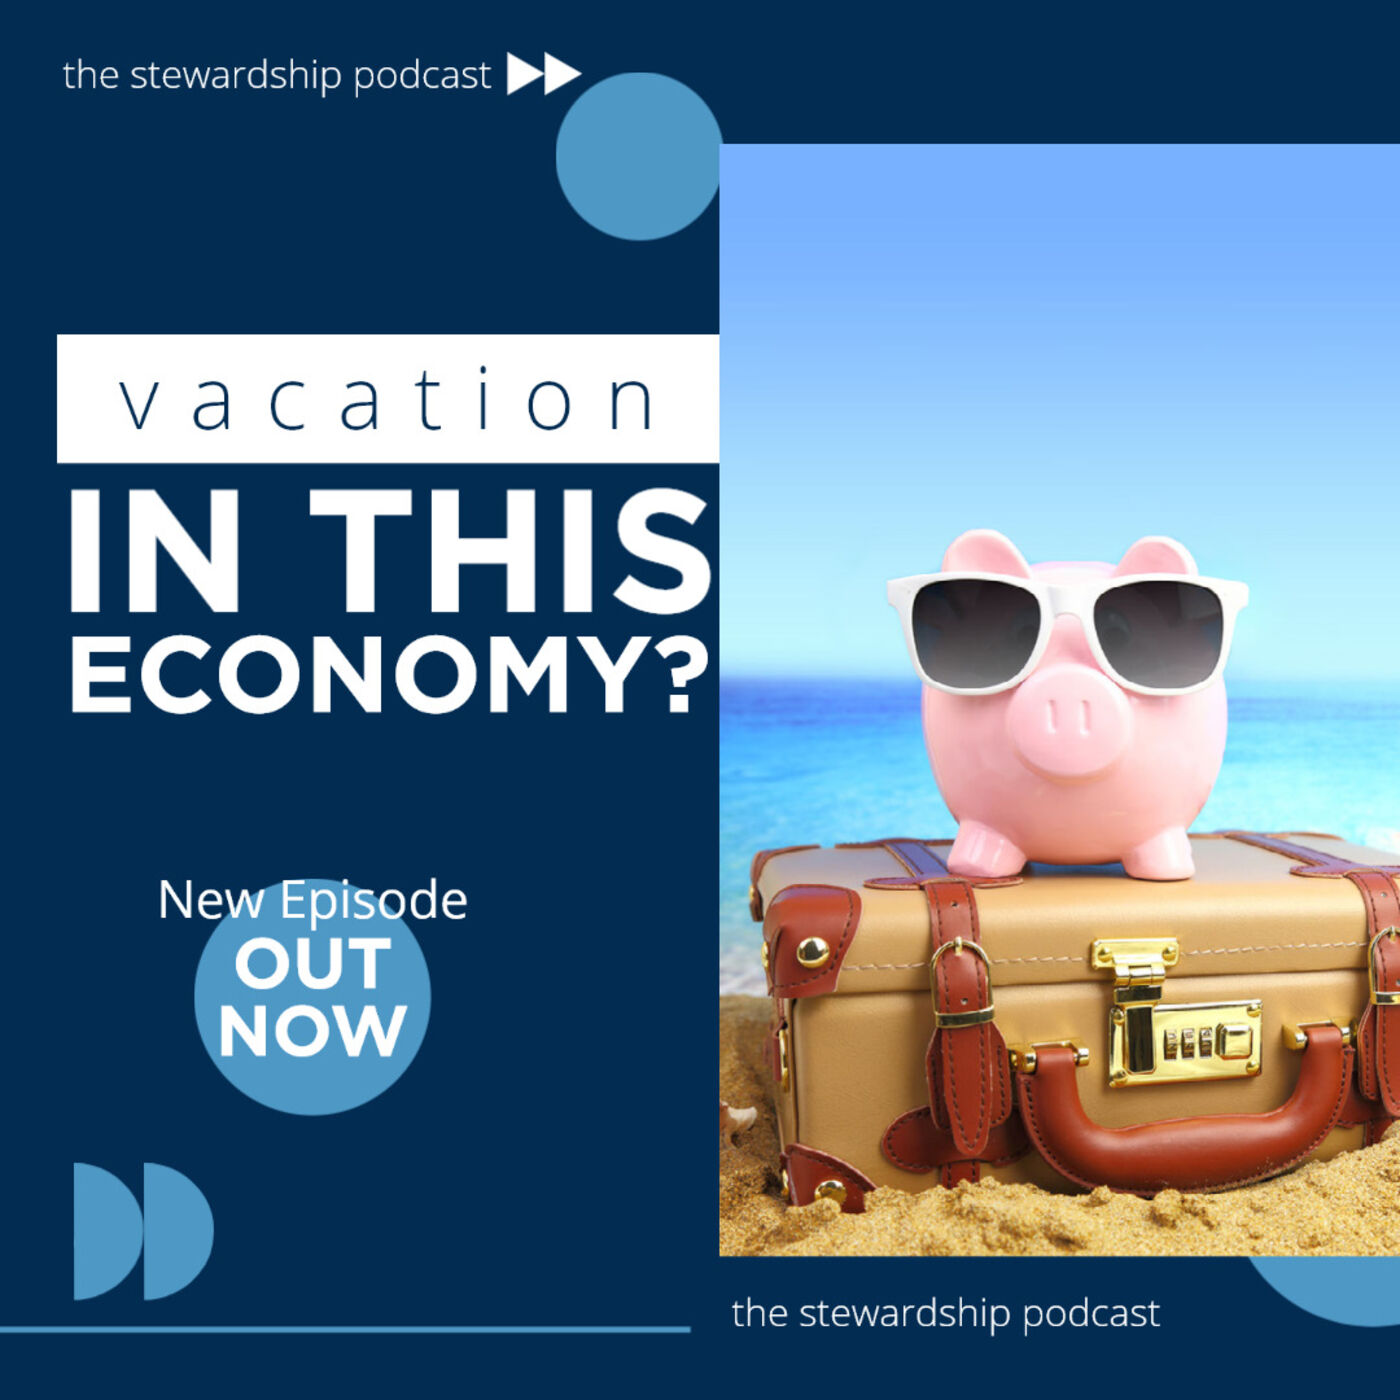 Vacation in THIS Economy? Have Fun this Summer